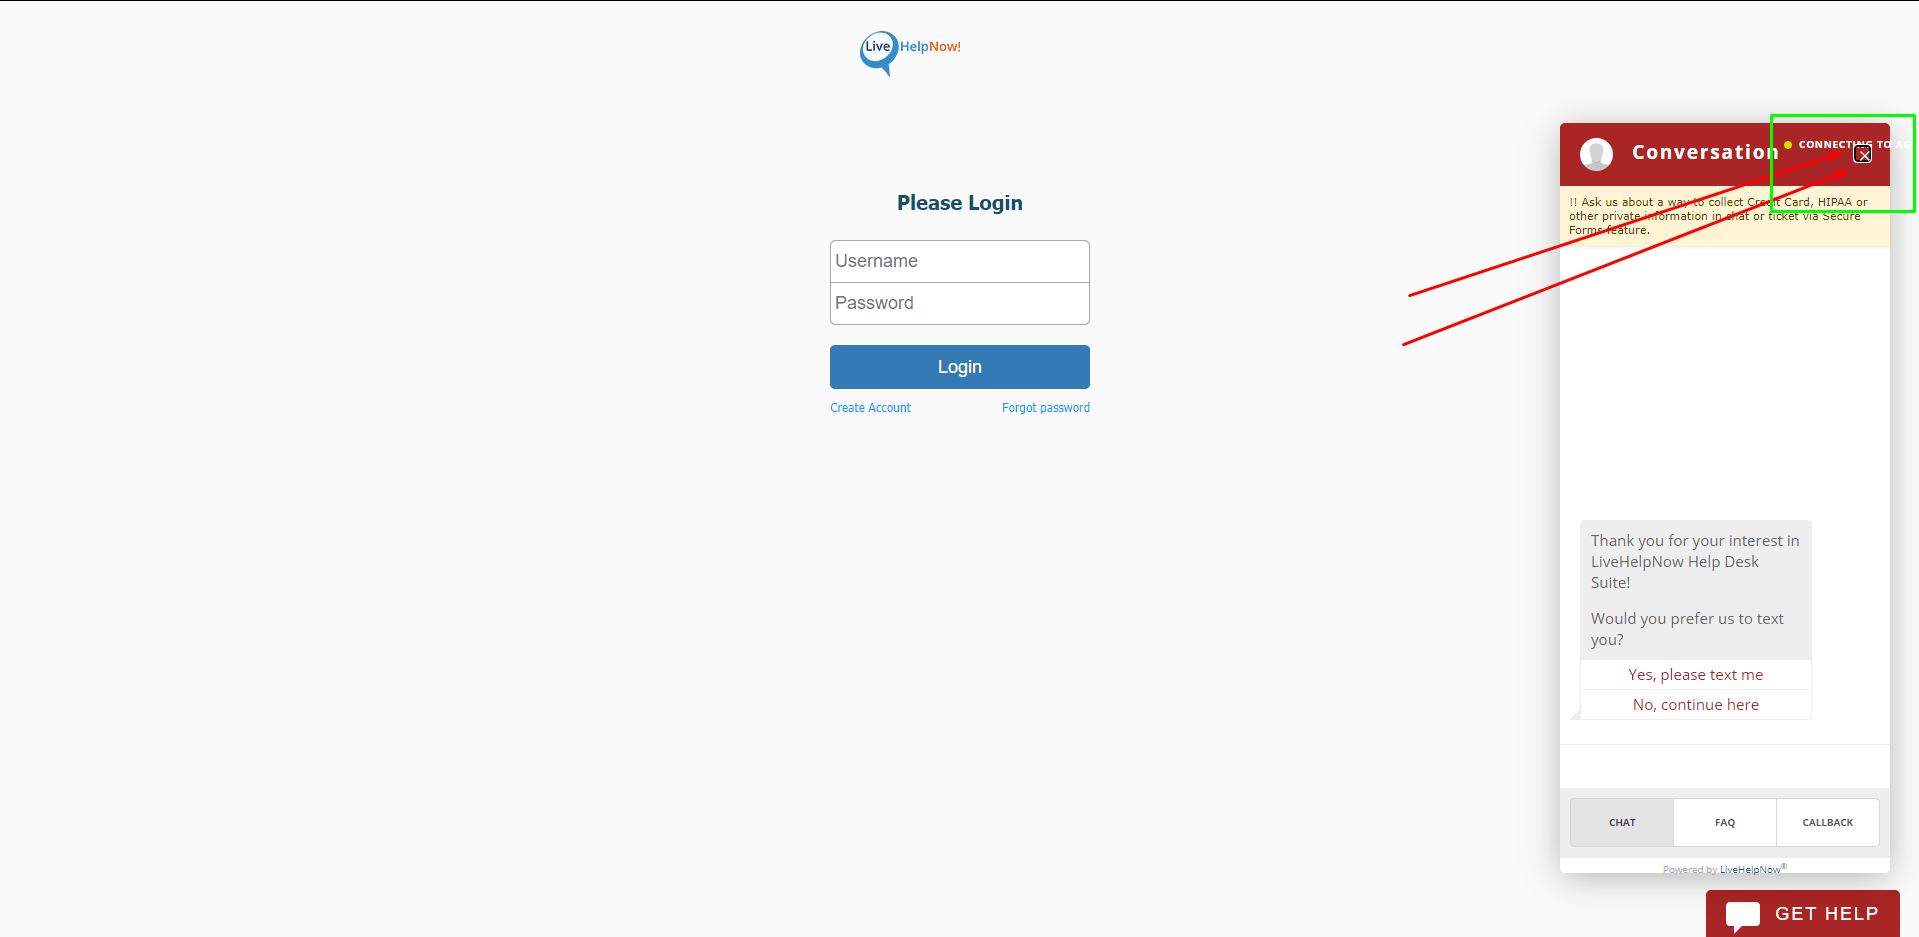 The “Connecting to agent” text and “X” button are shifted in the “Live Chat” pop-up